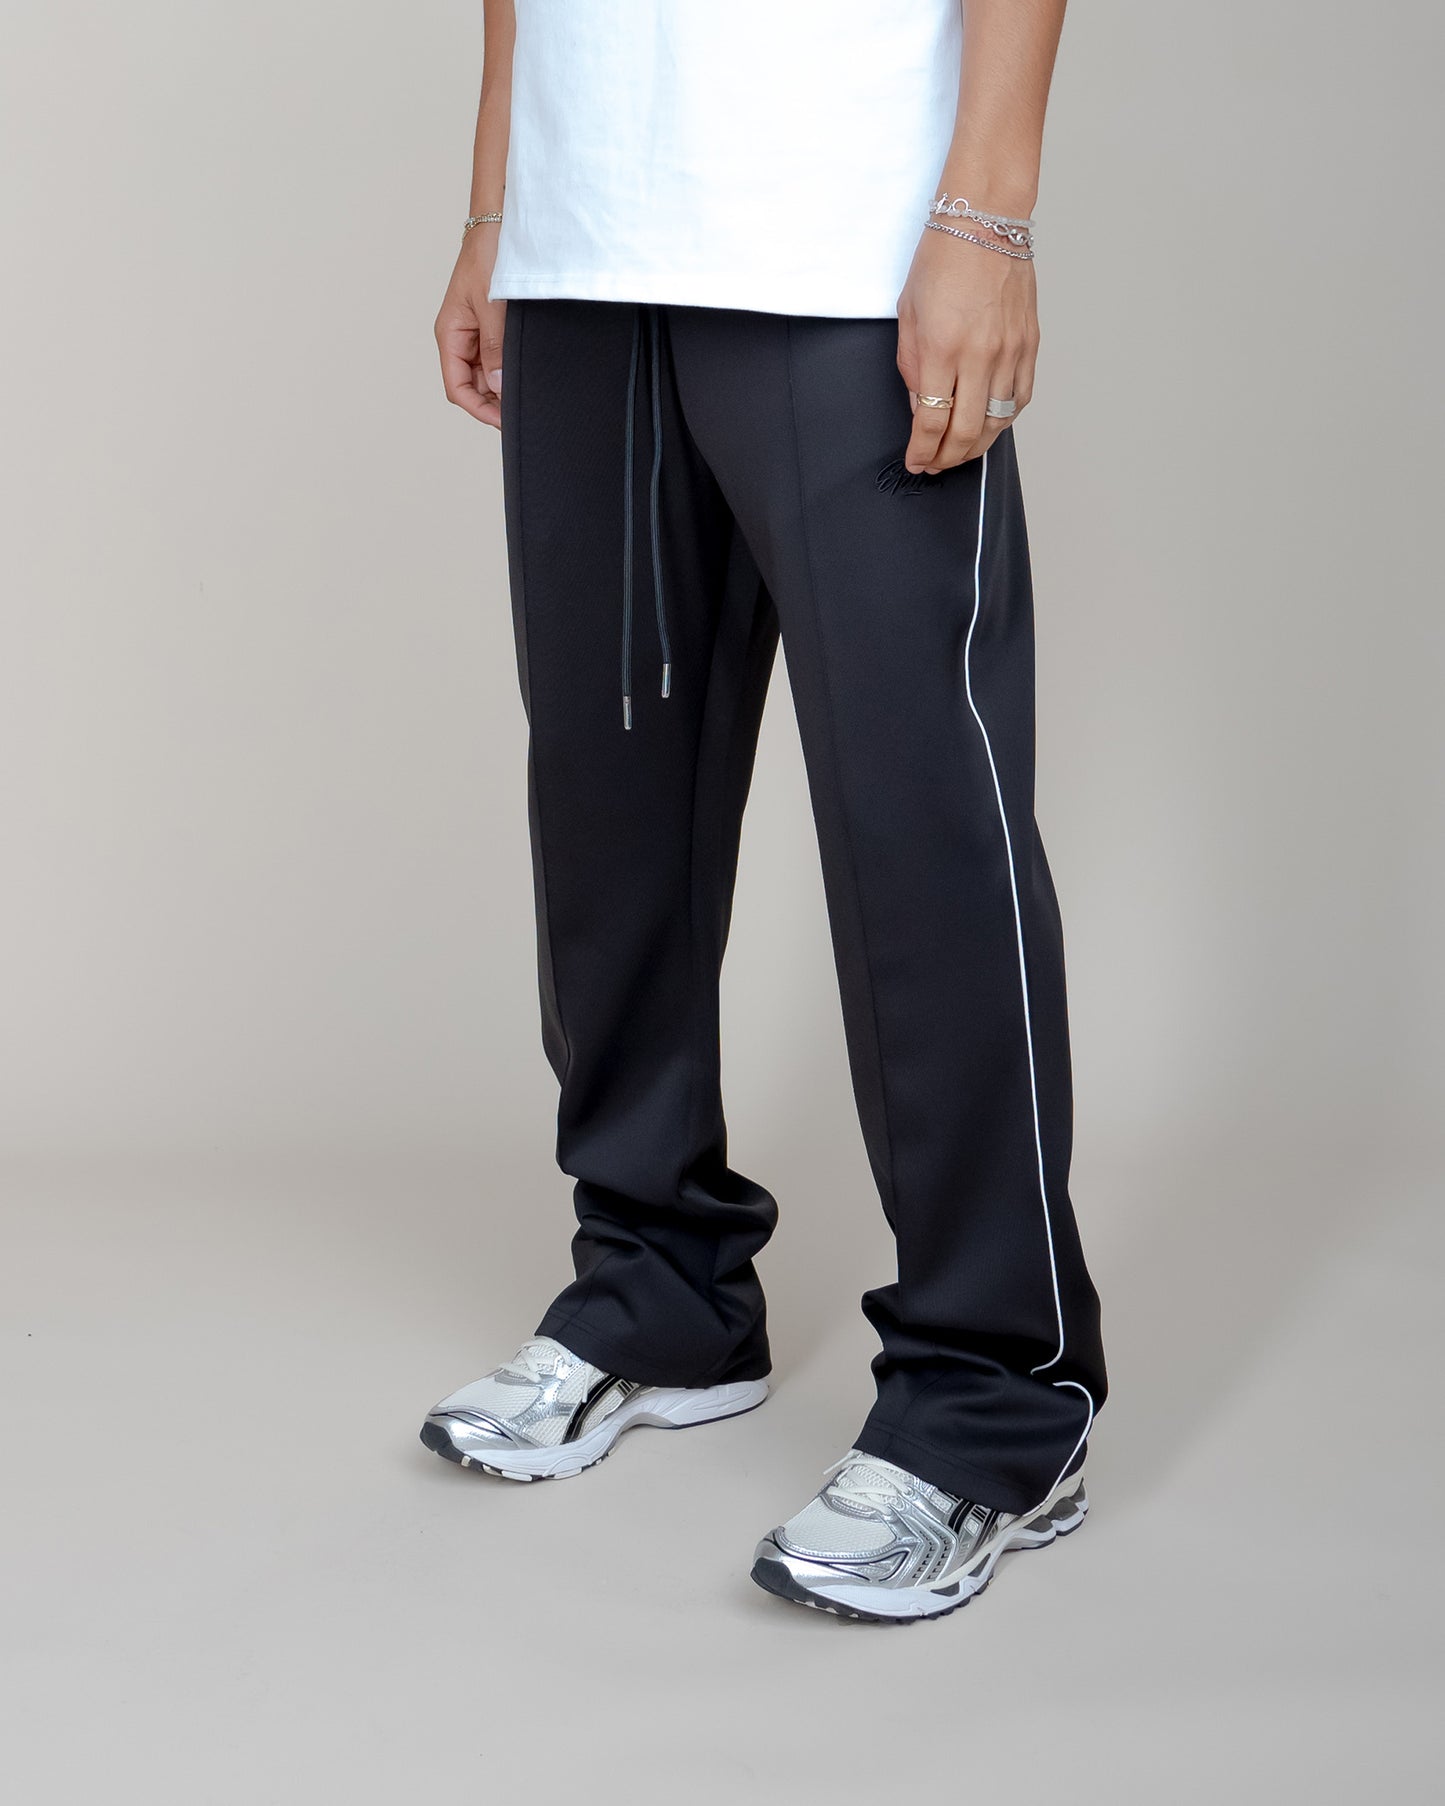 EPTM PERFECT PIPING TRACK PANTS-BLACK